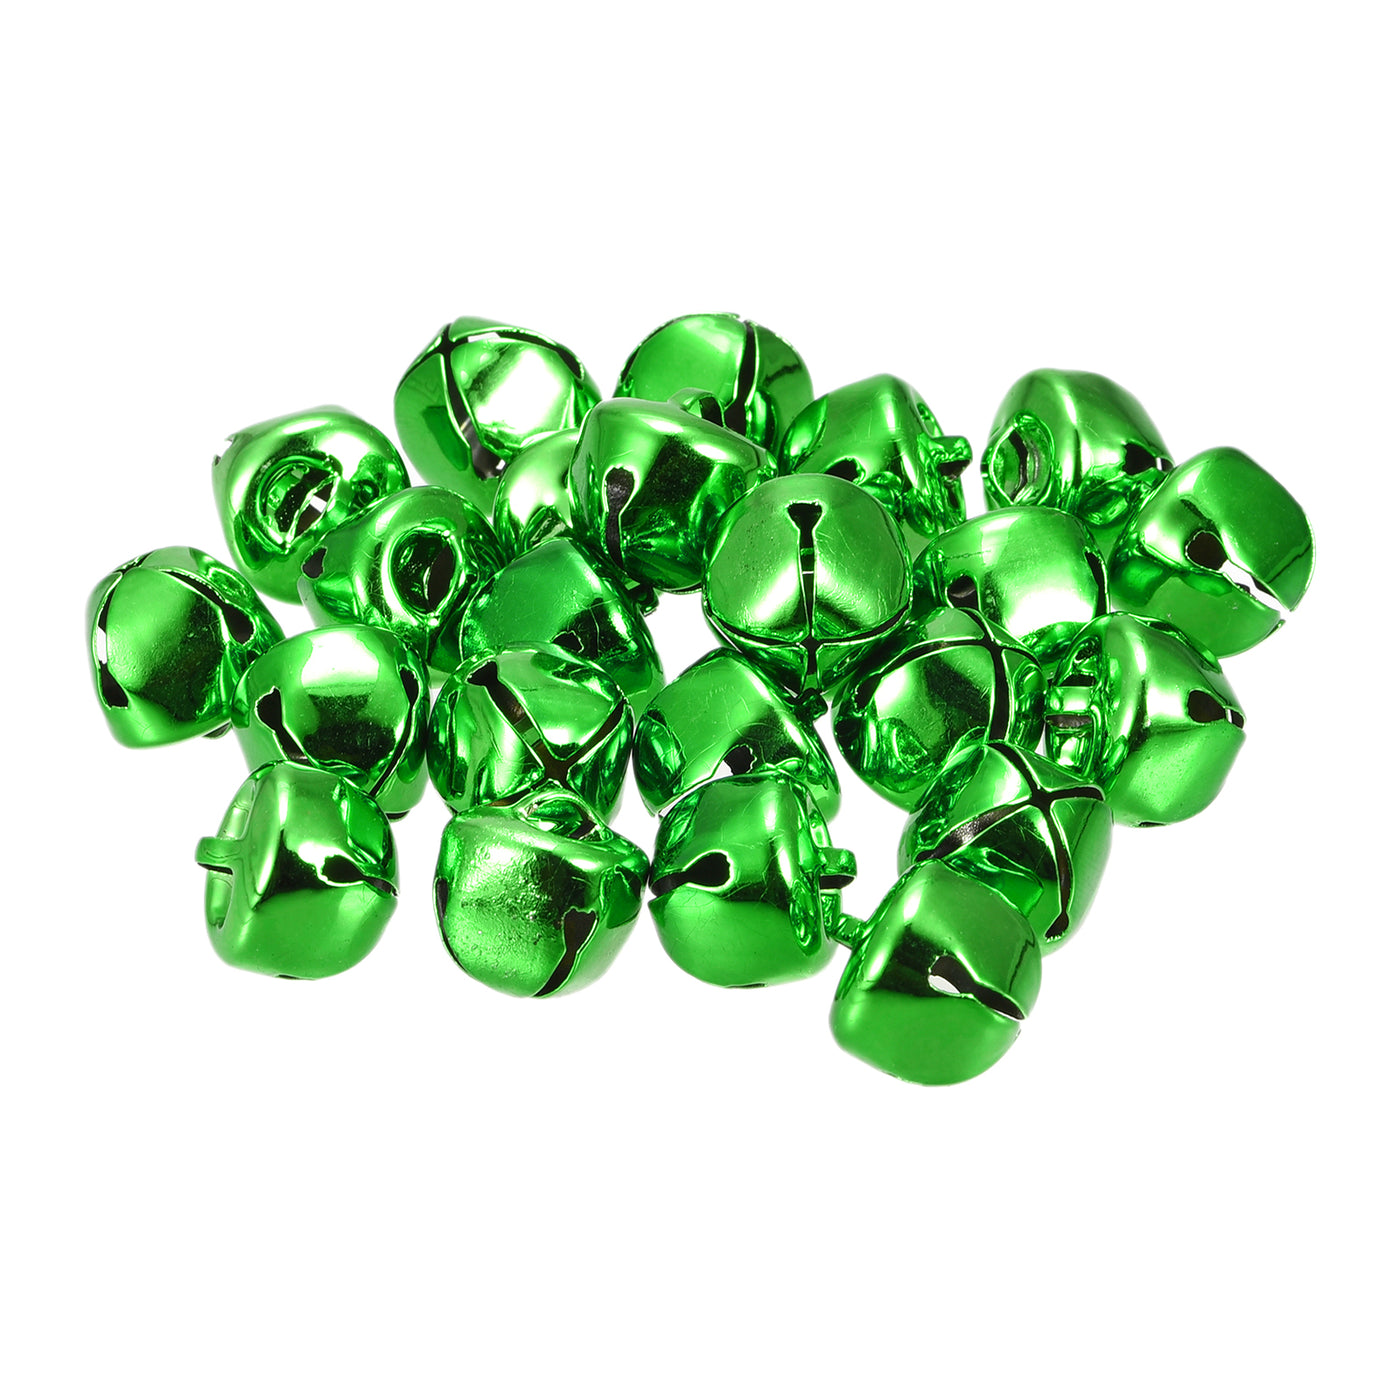 uxcell Uxcell Jingle Bells, 12mm 120pcs Small Bells for Crafts DIY Christmas, Green